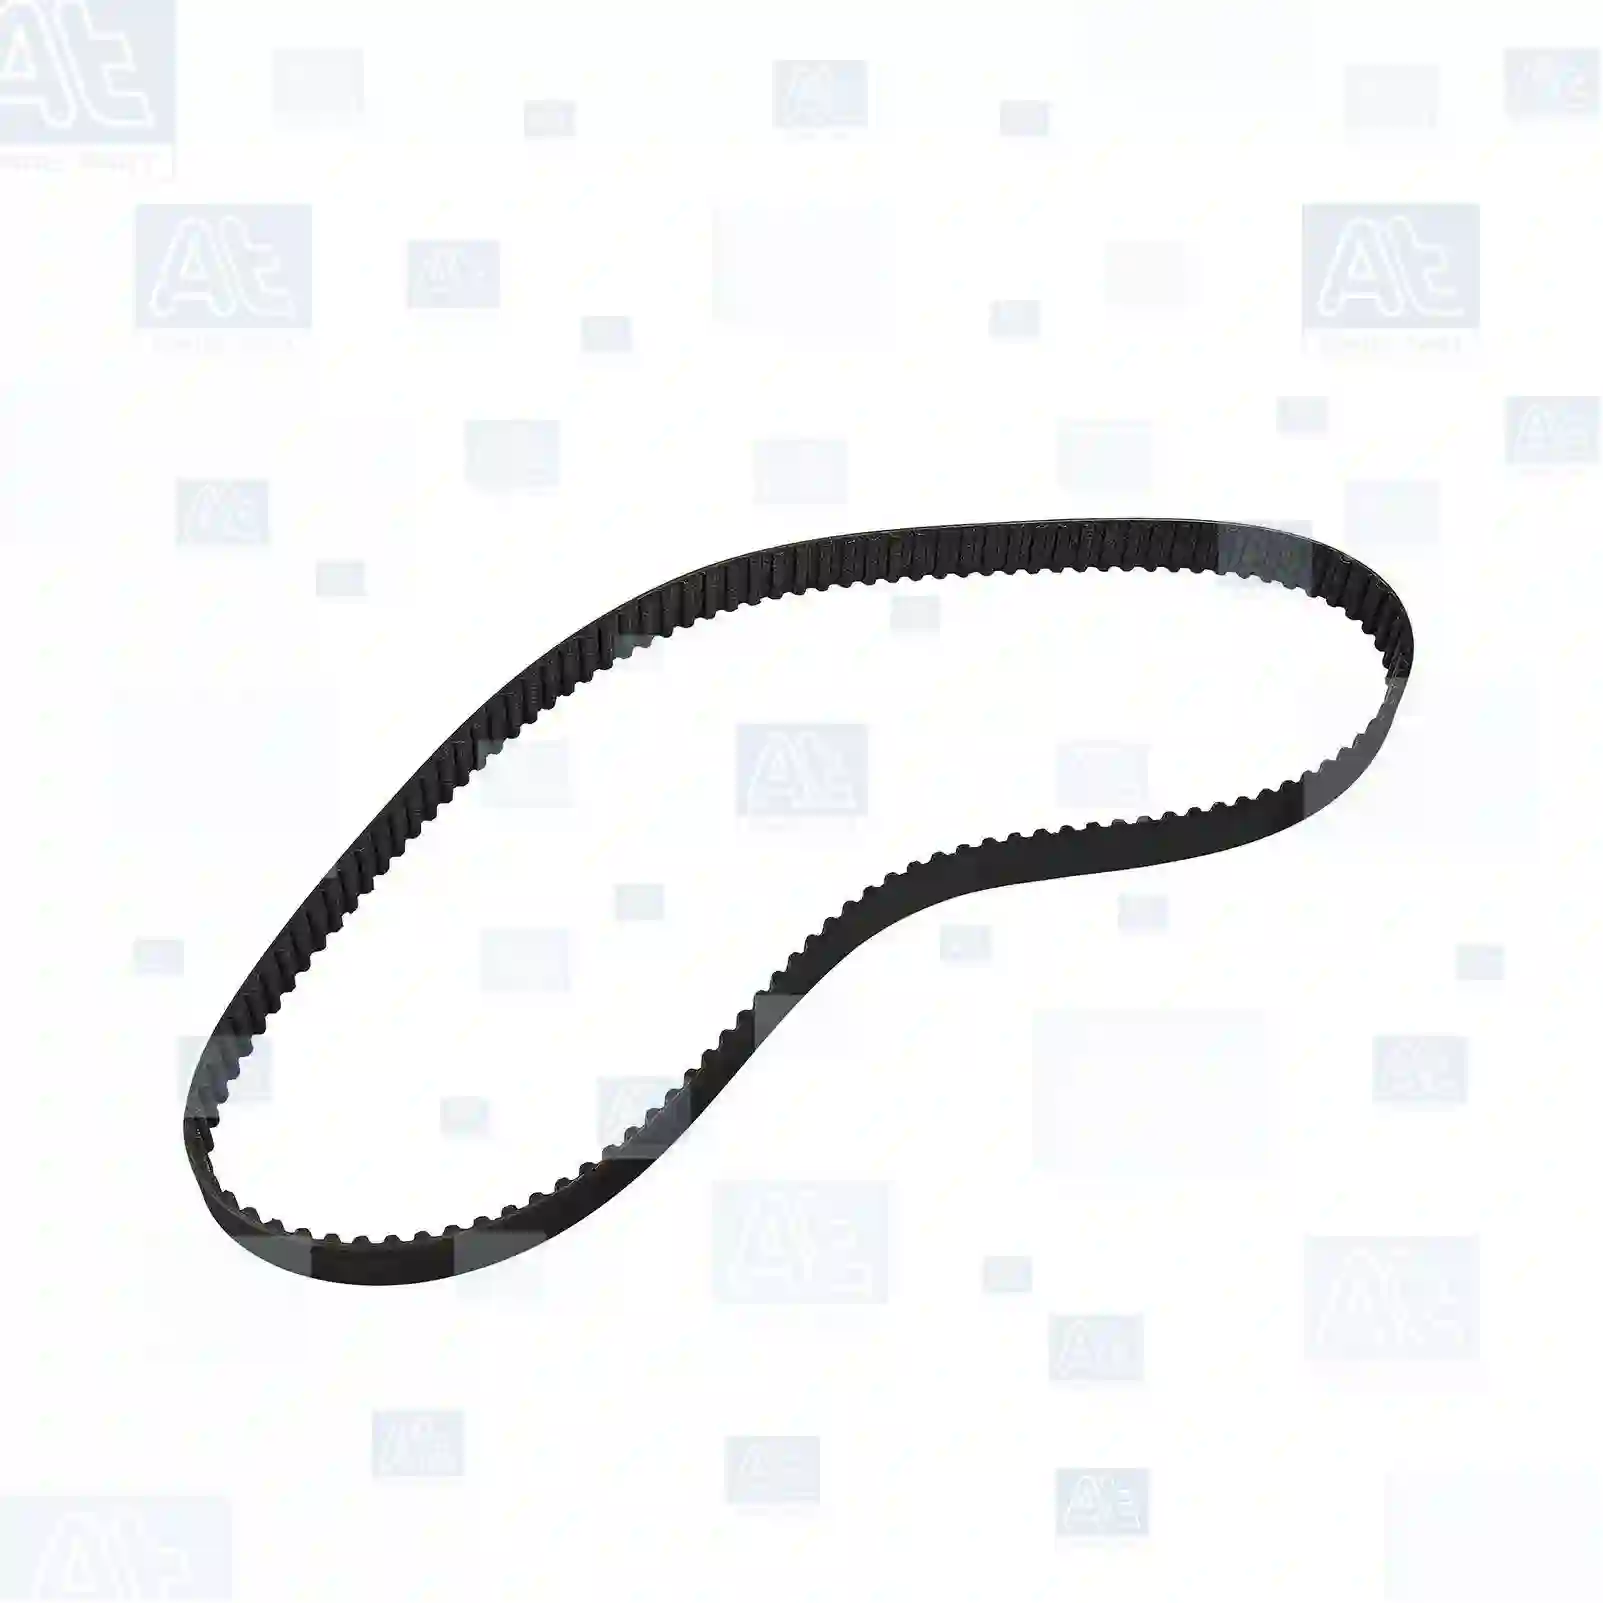 Timing belt, 77708553, 046109119, 046109119E, 074109119A, 074109119B, 074109119E, 074109119F, 074109119H, 074109119J, 074109119L, 074109119P, 074109119R, 074109119R, 272462, 2724623, 9180593, 91805937, 9464100, 046109119, 046109119A, 046109119E, 074109119A, 074109119B, 074109119E, 074109119F, 074109119H, 074109119J, 074109119L, 074109119P, 074109119R, ZG02203-0008 ||  77708553 At Spare Part | Engine, Accelerator Pedal, Camshaft, Connecting Rod, Crankcase, Crankshaft, Cylinder Head, Engine Suspension Mountings, Exhaust Manifold, Exhaust Gas Recirculation, Filter Kits, Flywheel Housing, General Overhaul Kits, Engine, Intake Manifold, Oil Cleaner, Oil Cooler, Oil Filter, Oil Pump, Oil Sump, Piston & Liner, Sensor & Switch, Timing Case, Turbocharger, Cooling System, Belt Tensioner, Coolant Filter, Coolant Pipe, Corrosion Prevention Agent, Drive, Expansion Tank, Fan, Intercooler, Monitors & Gauges, Radiator, Thermostat, V-Belt / Timing belt, Water Pump, Fuel System, Electronical Injector Unit, Feed Pump, Fuel Filter, cpl., Fuel Gauge Sender,  Fuel Line, Fuel Pump, Fuel Tank, Injection Line Kit, Injection Pump, Exhaust System, Clutch & Pedal, Gearbox, Propeller Shaft, Axles, Brake System, Hubs & Wheels, Suspension, Leaf Spring, Universal Parts / Accessories, Steering, Electrical System, Cabin Timing belt, 77708553, 046109119, 046109119E, 074109119A, 074109119B, 074109119E, 074109119F, 074109119H, 074109119J, 074109119L, 074109119P, 074109119R, 074109119R, 272462, 2724623, 9180593, 91805937, 9464100, 046109119, 046109119A, 046109119E, 074109119A, 074109119B, 074109119E, 074109119F, 074109119H, 074109119J, 074109119L, 074109119P, 074109119R, ZG02203-0008 ||  77708553 At Spare Part | Engine, Accelerator Pedal, Camshaft, Connecting Rod, Crankcase, Crankshaft, Cylinder Head, Engine Suspension Mountings, Exhaust Manifold, Exhaust Gas Recirculation, Filter Kits, Flywheel Housing, General Overhaul Kits, Engine, Intake Manifold, Oil Cleaner, Oil Cooler, Oil Filter, Oil Pump, Oil Sump, Piston & Liner, Sensor & Switch, Timing Case, Turbocharger, Cooling System, Belt Tensioner, Coolant Filter, Coolant Pipe, Corrosion Prevention Agent, Drive, Expansion Tank, Fan, Intercooler, Monitors & Gauges, Radiator, Thermostat, V-Belt / Timing belt, Water Pump, Fuel System, Electronical Injector Unit, Feed Pump, Fuel Filter, cpl., Fuel Gauge Sender,  Fuel Line, Fuel Pump, Fuel Tank, Injection Line Kit, Injection Pump, Exhaust System, Clutch & Pedal, Gearbox, Propeller Shaft, Axles, Brake System, Hubs & Wheels, Suspension, Leaf Spring, Universal Parts / Accessories, Steering, Electrical System, Cabin